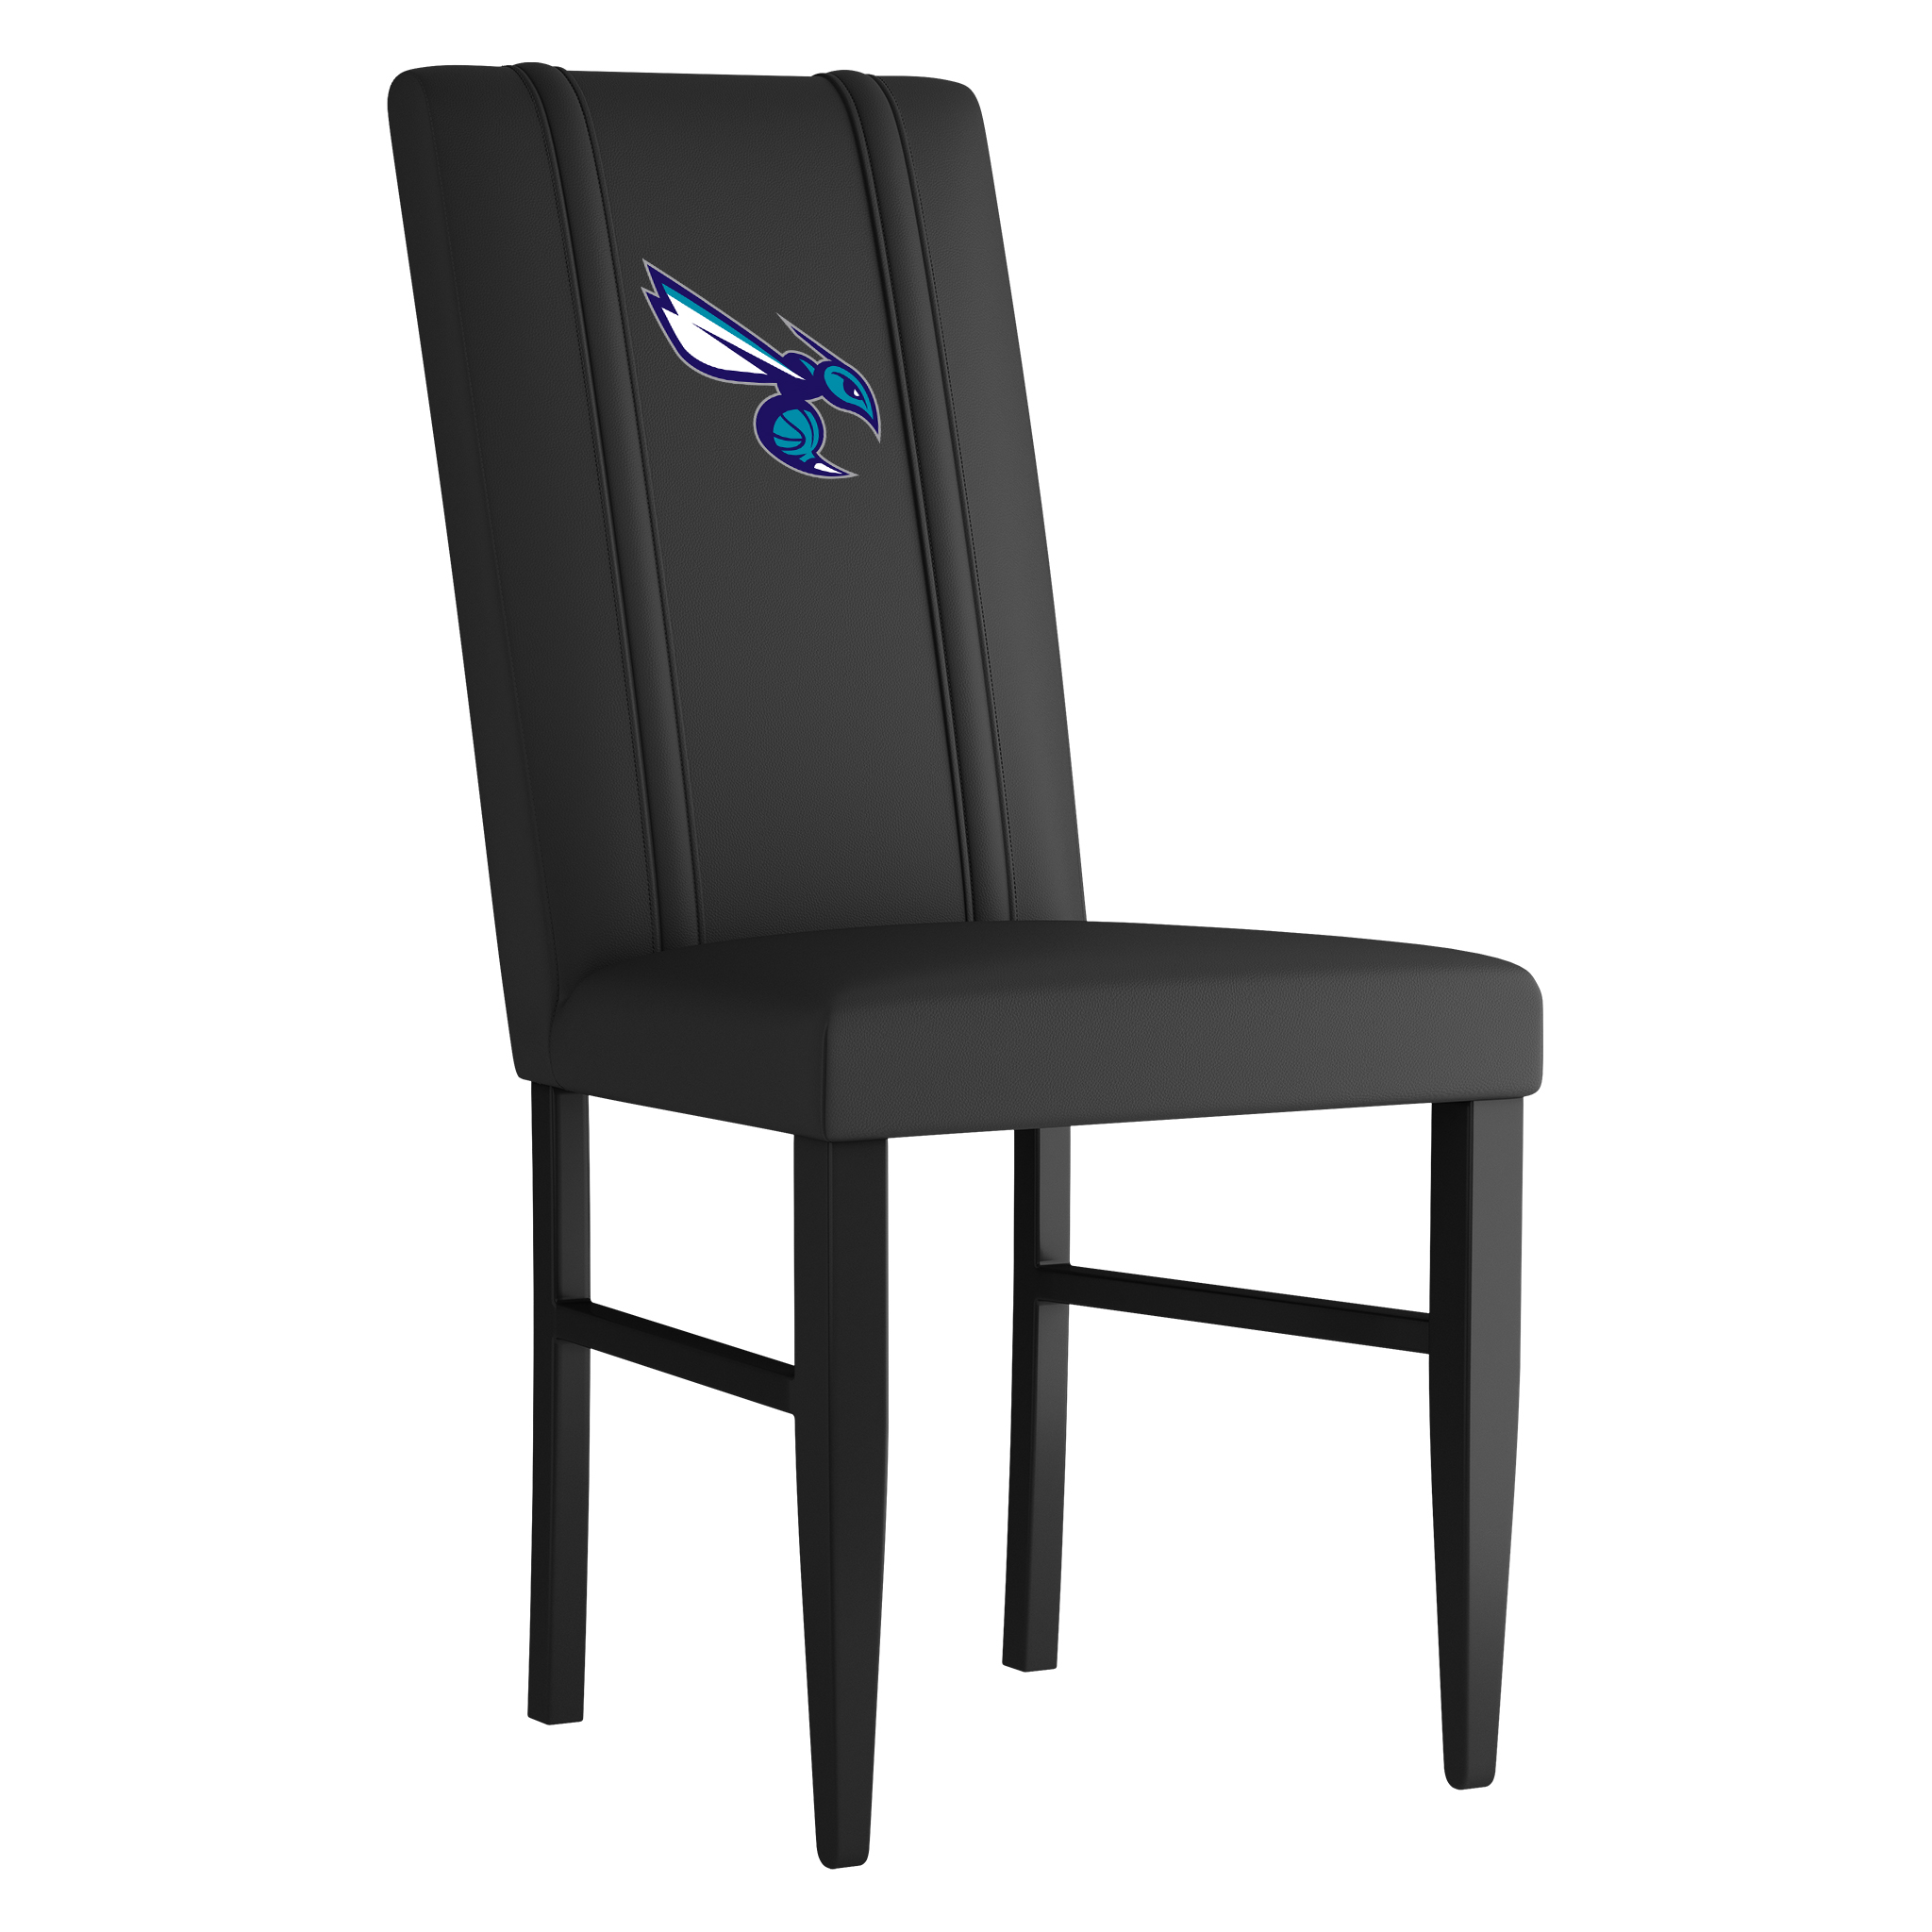 Charlotte Hornets Side Chair 2000 With Charlotte Hornets Secondary